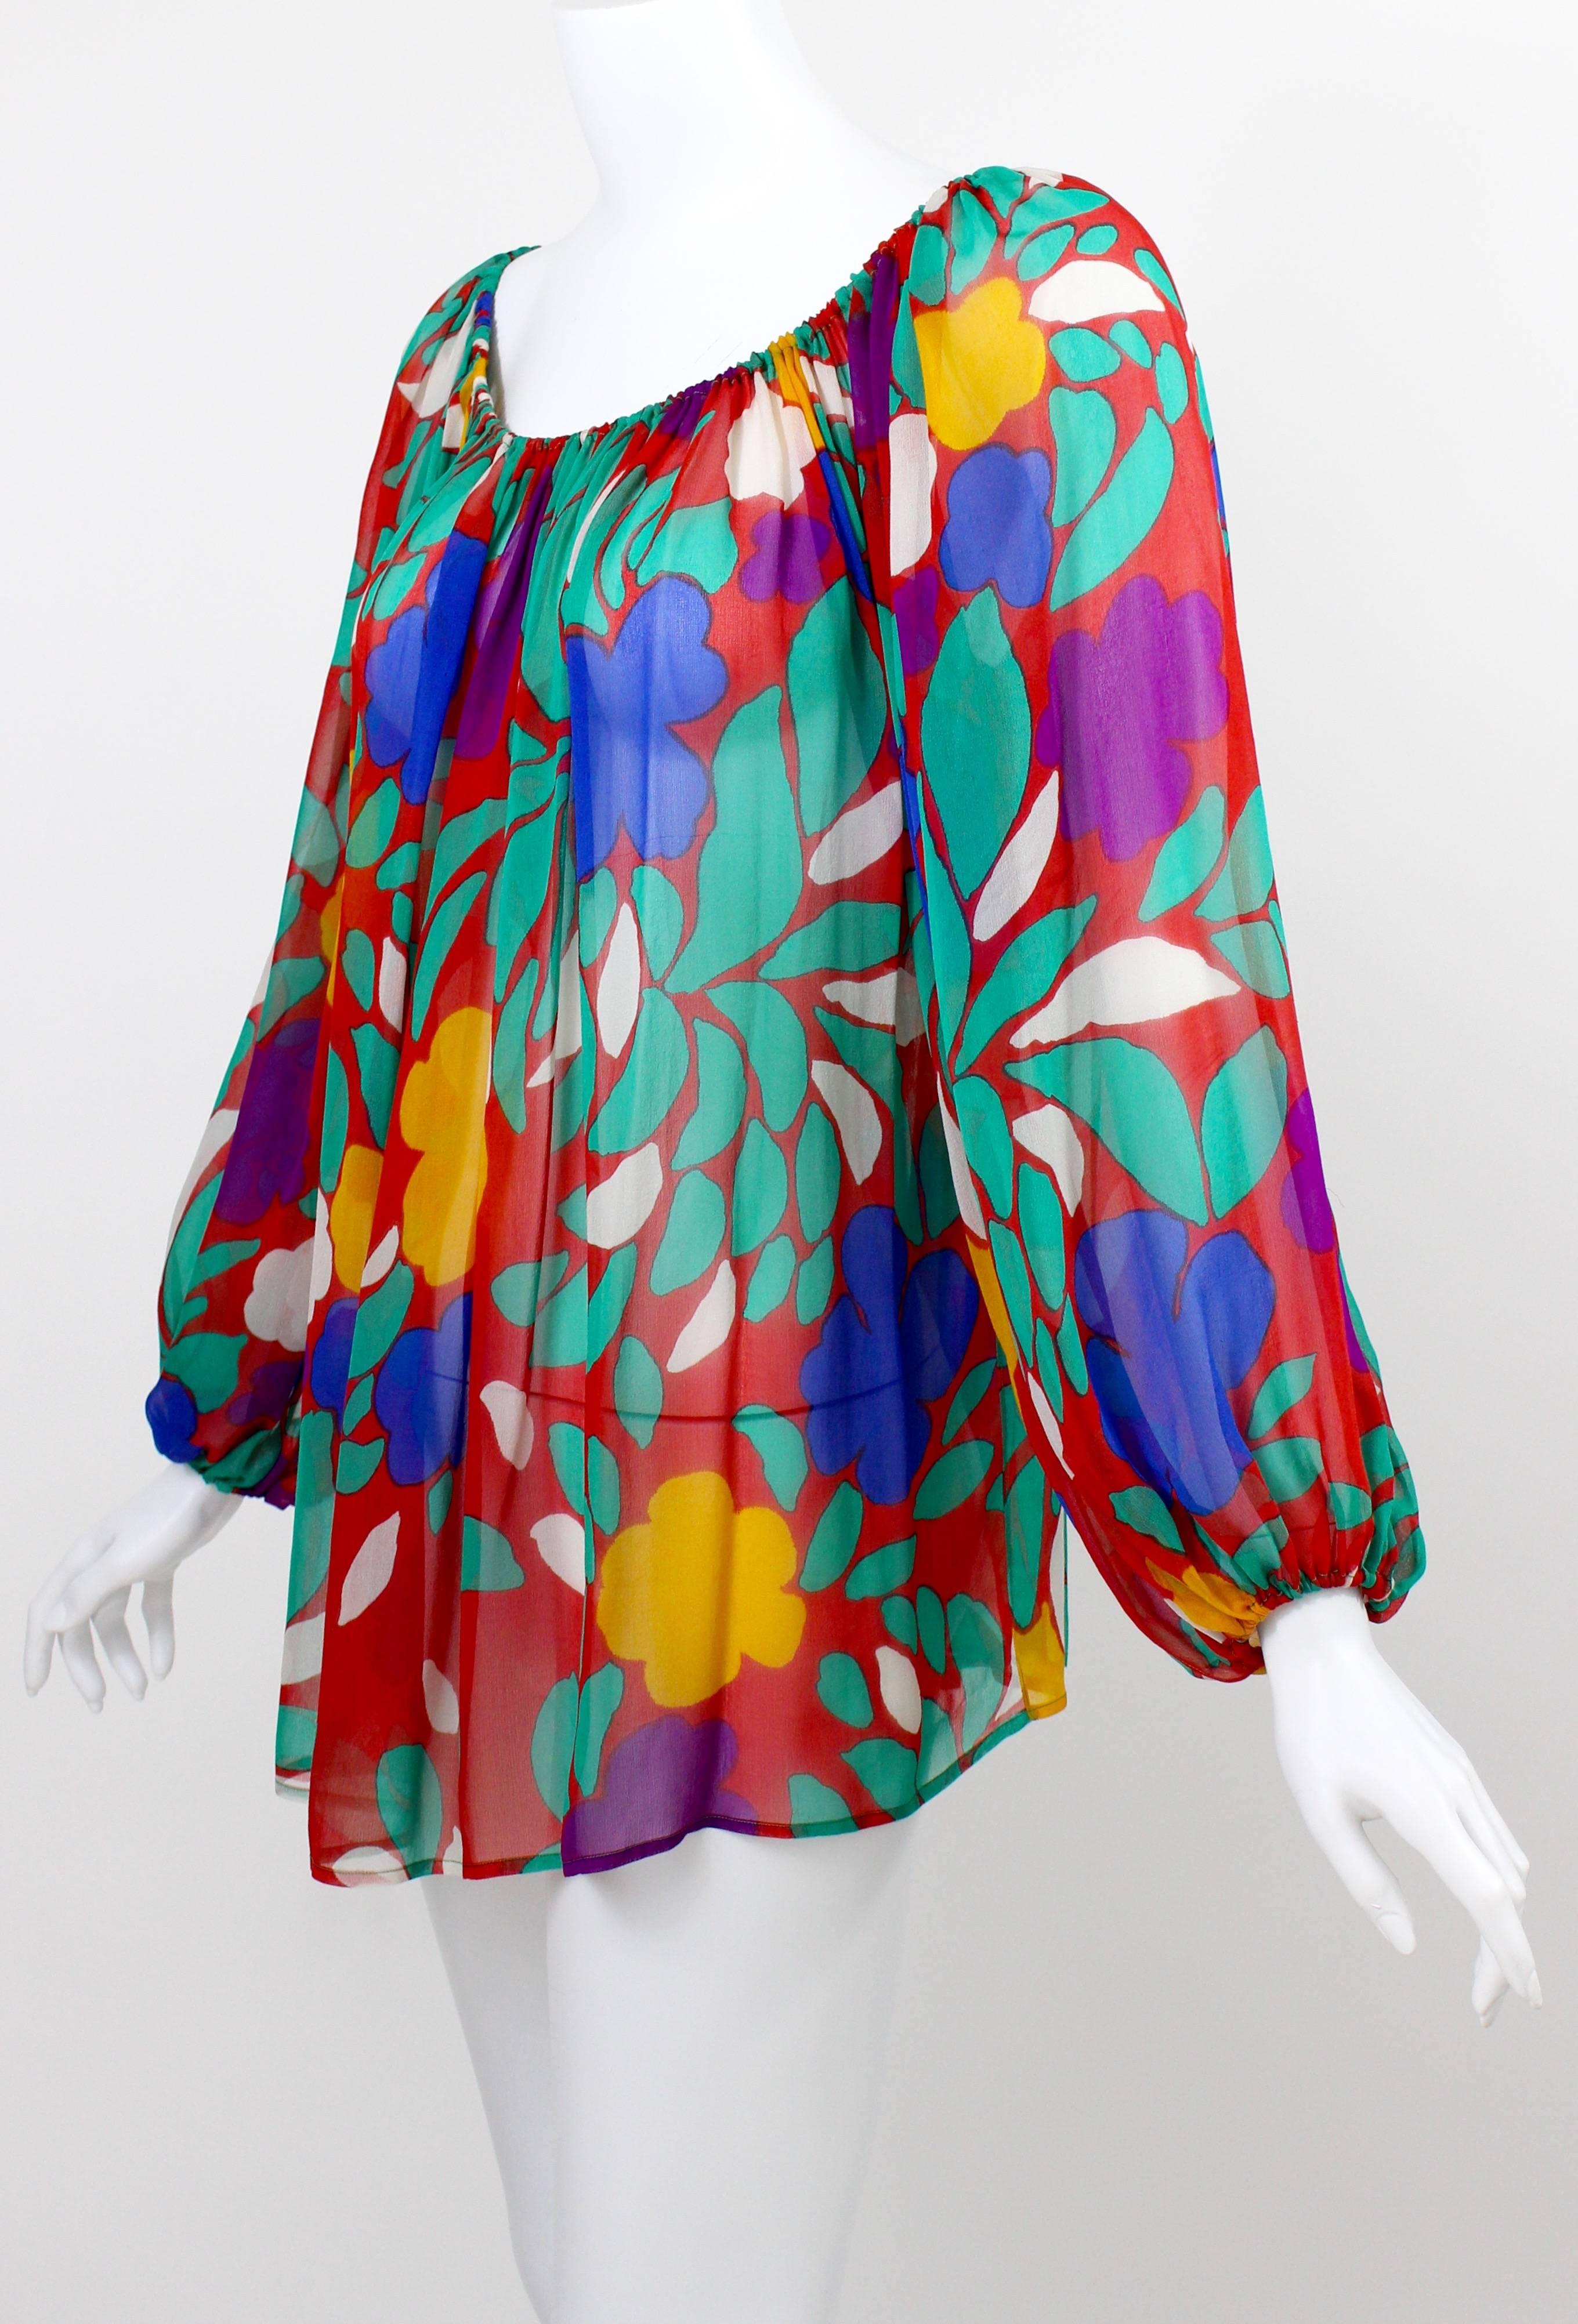 Yves Saint Laurent Silk Chiffon Colorful Floral Print Blouse Documented YSL 1979 In Excellent Condition For Sale In Boca Raton, FL